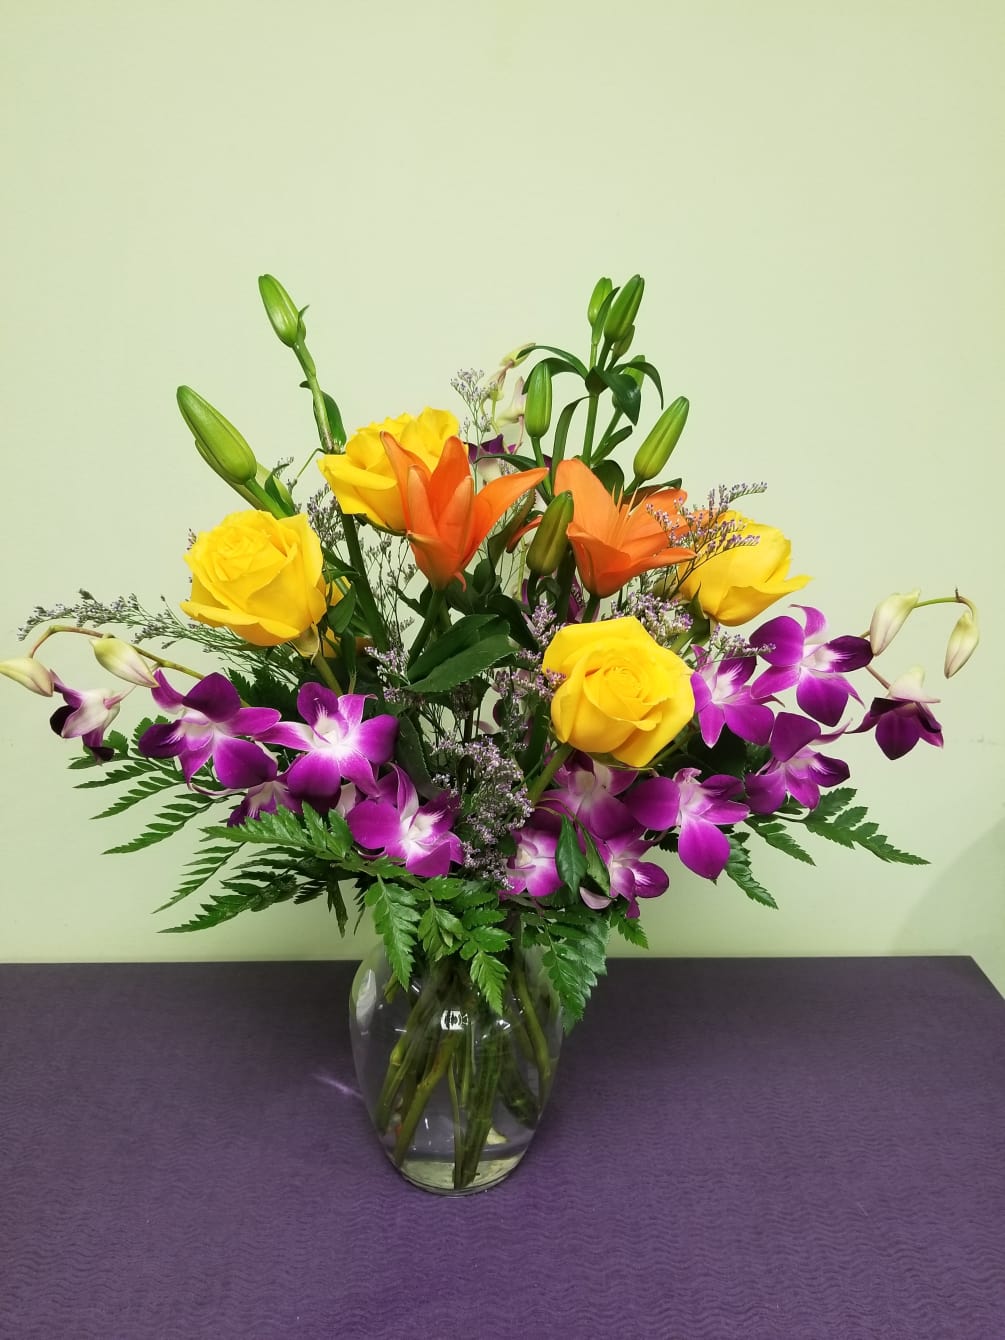 Enjoy the summer weather this year with this tropical array of lilies